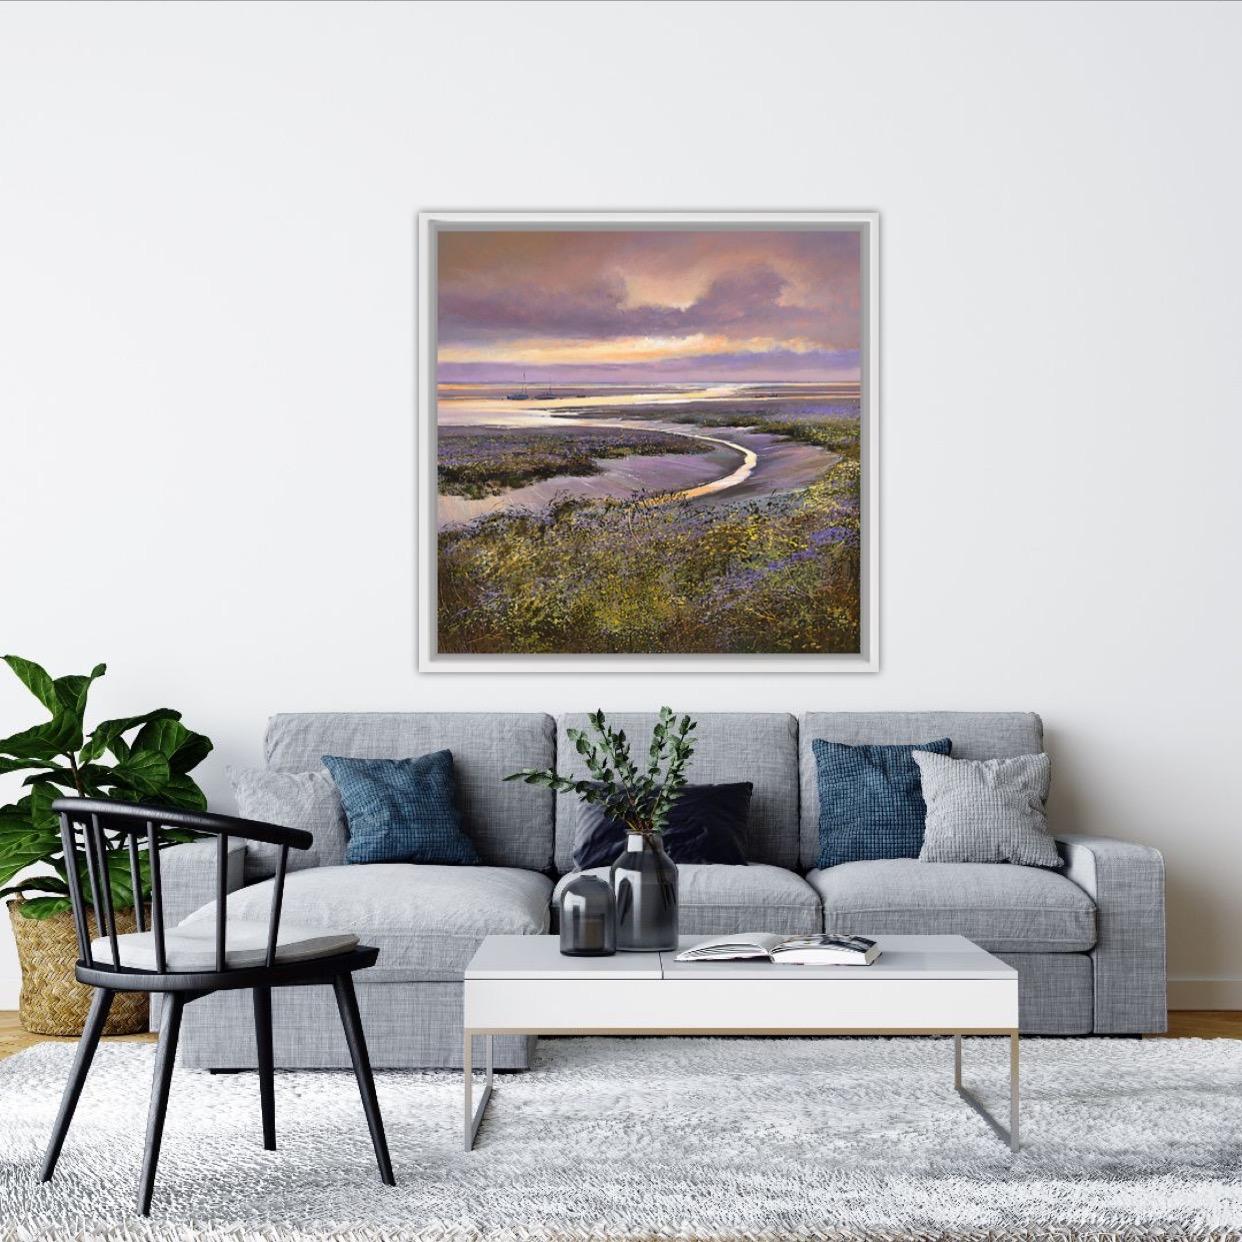 Dusk at Morston – Large Canvas Print
Limited edition canvas prints by Michael Sanders. These stunning prints are created using fine art archival quality inks and canvas with three layers of UV varnish to protect the artwork and enhance the colours.